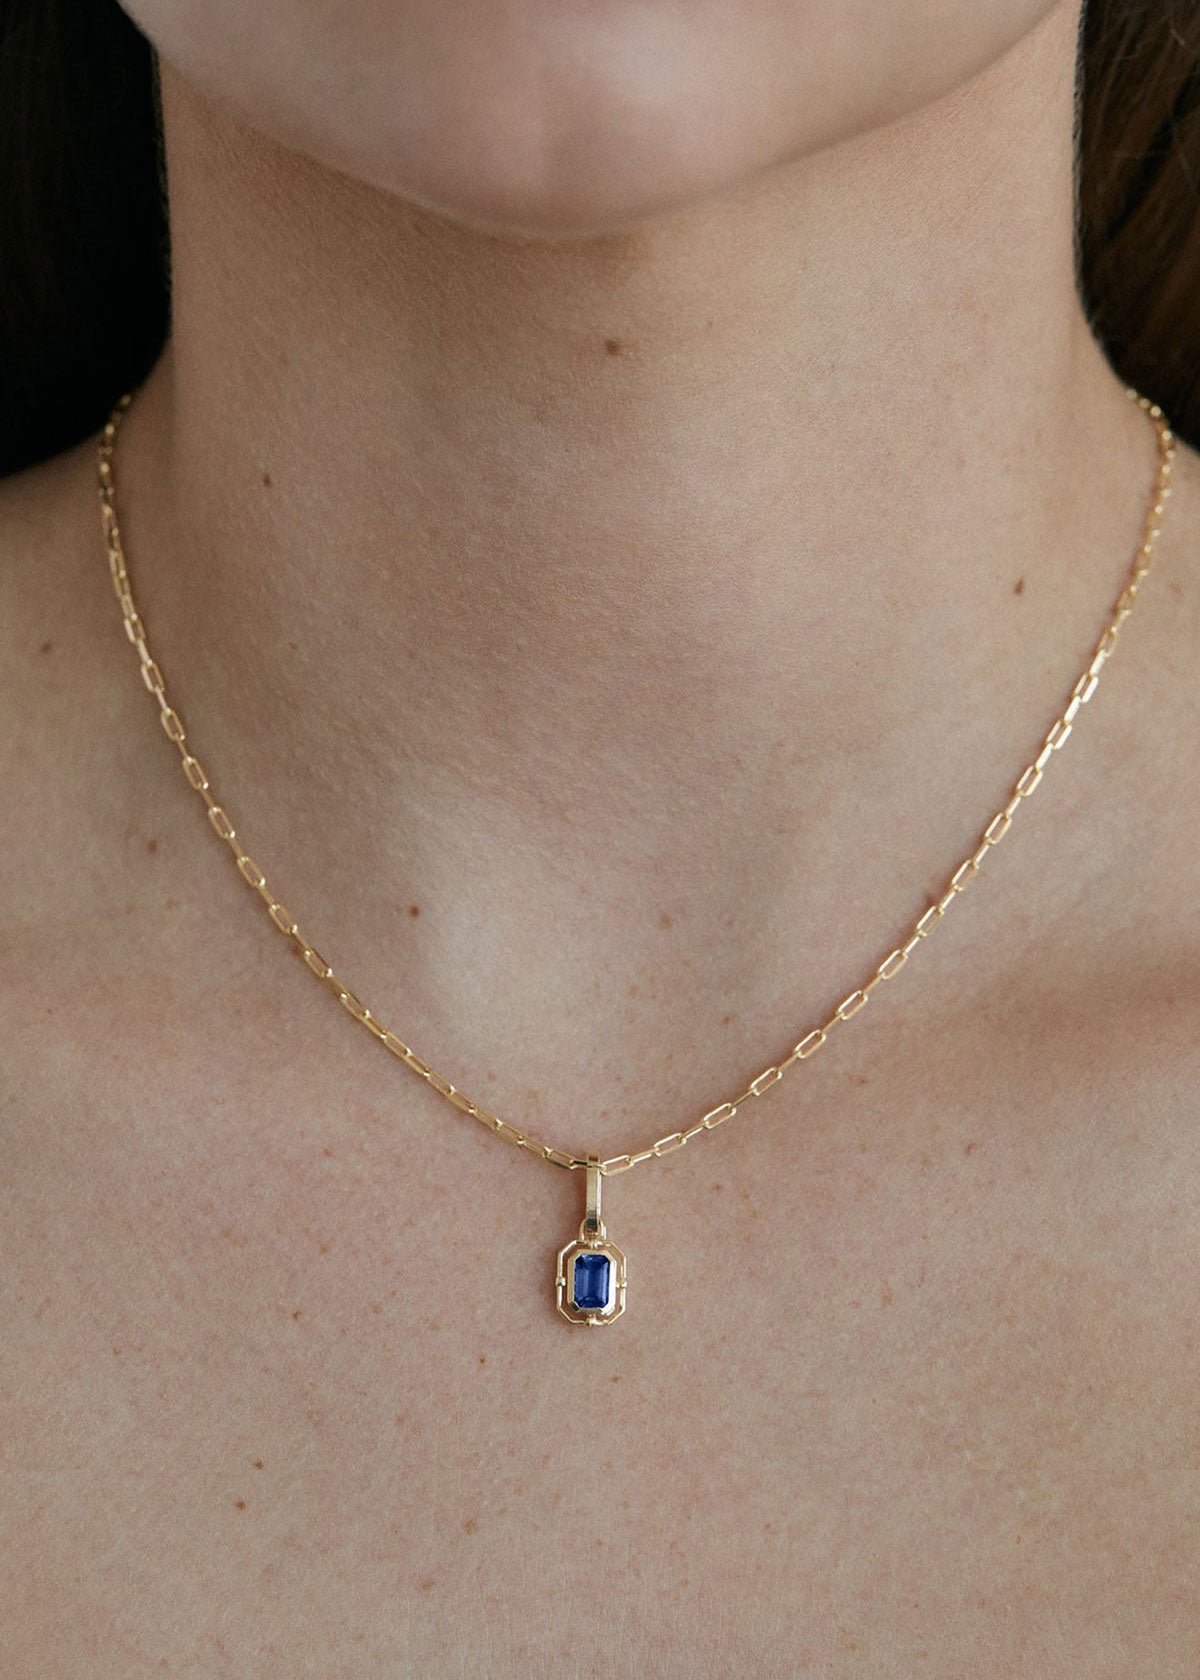 alt="Products Lyra Baguette Pendant I - Blue Sapphire with pico link chain"